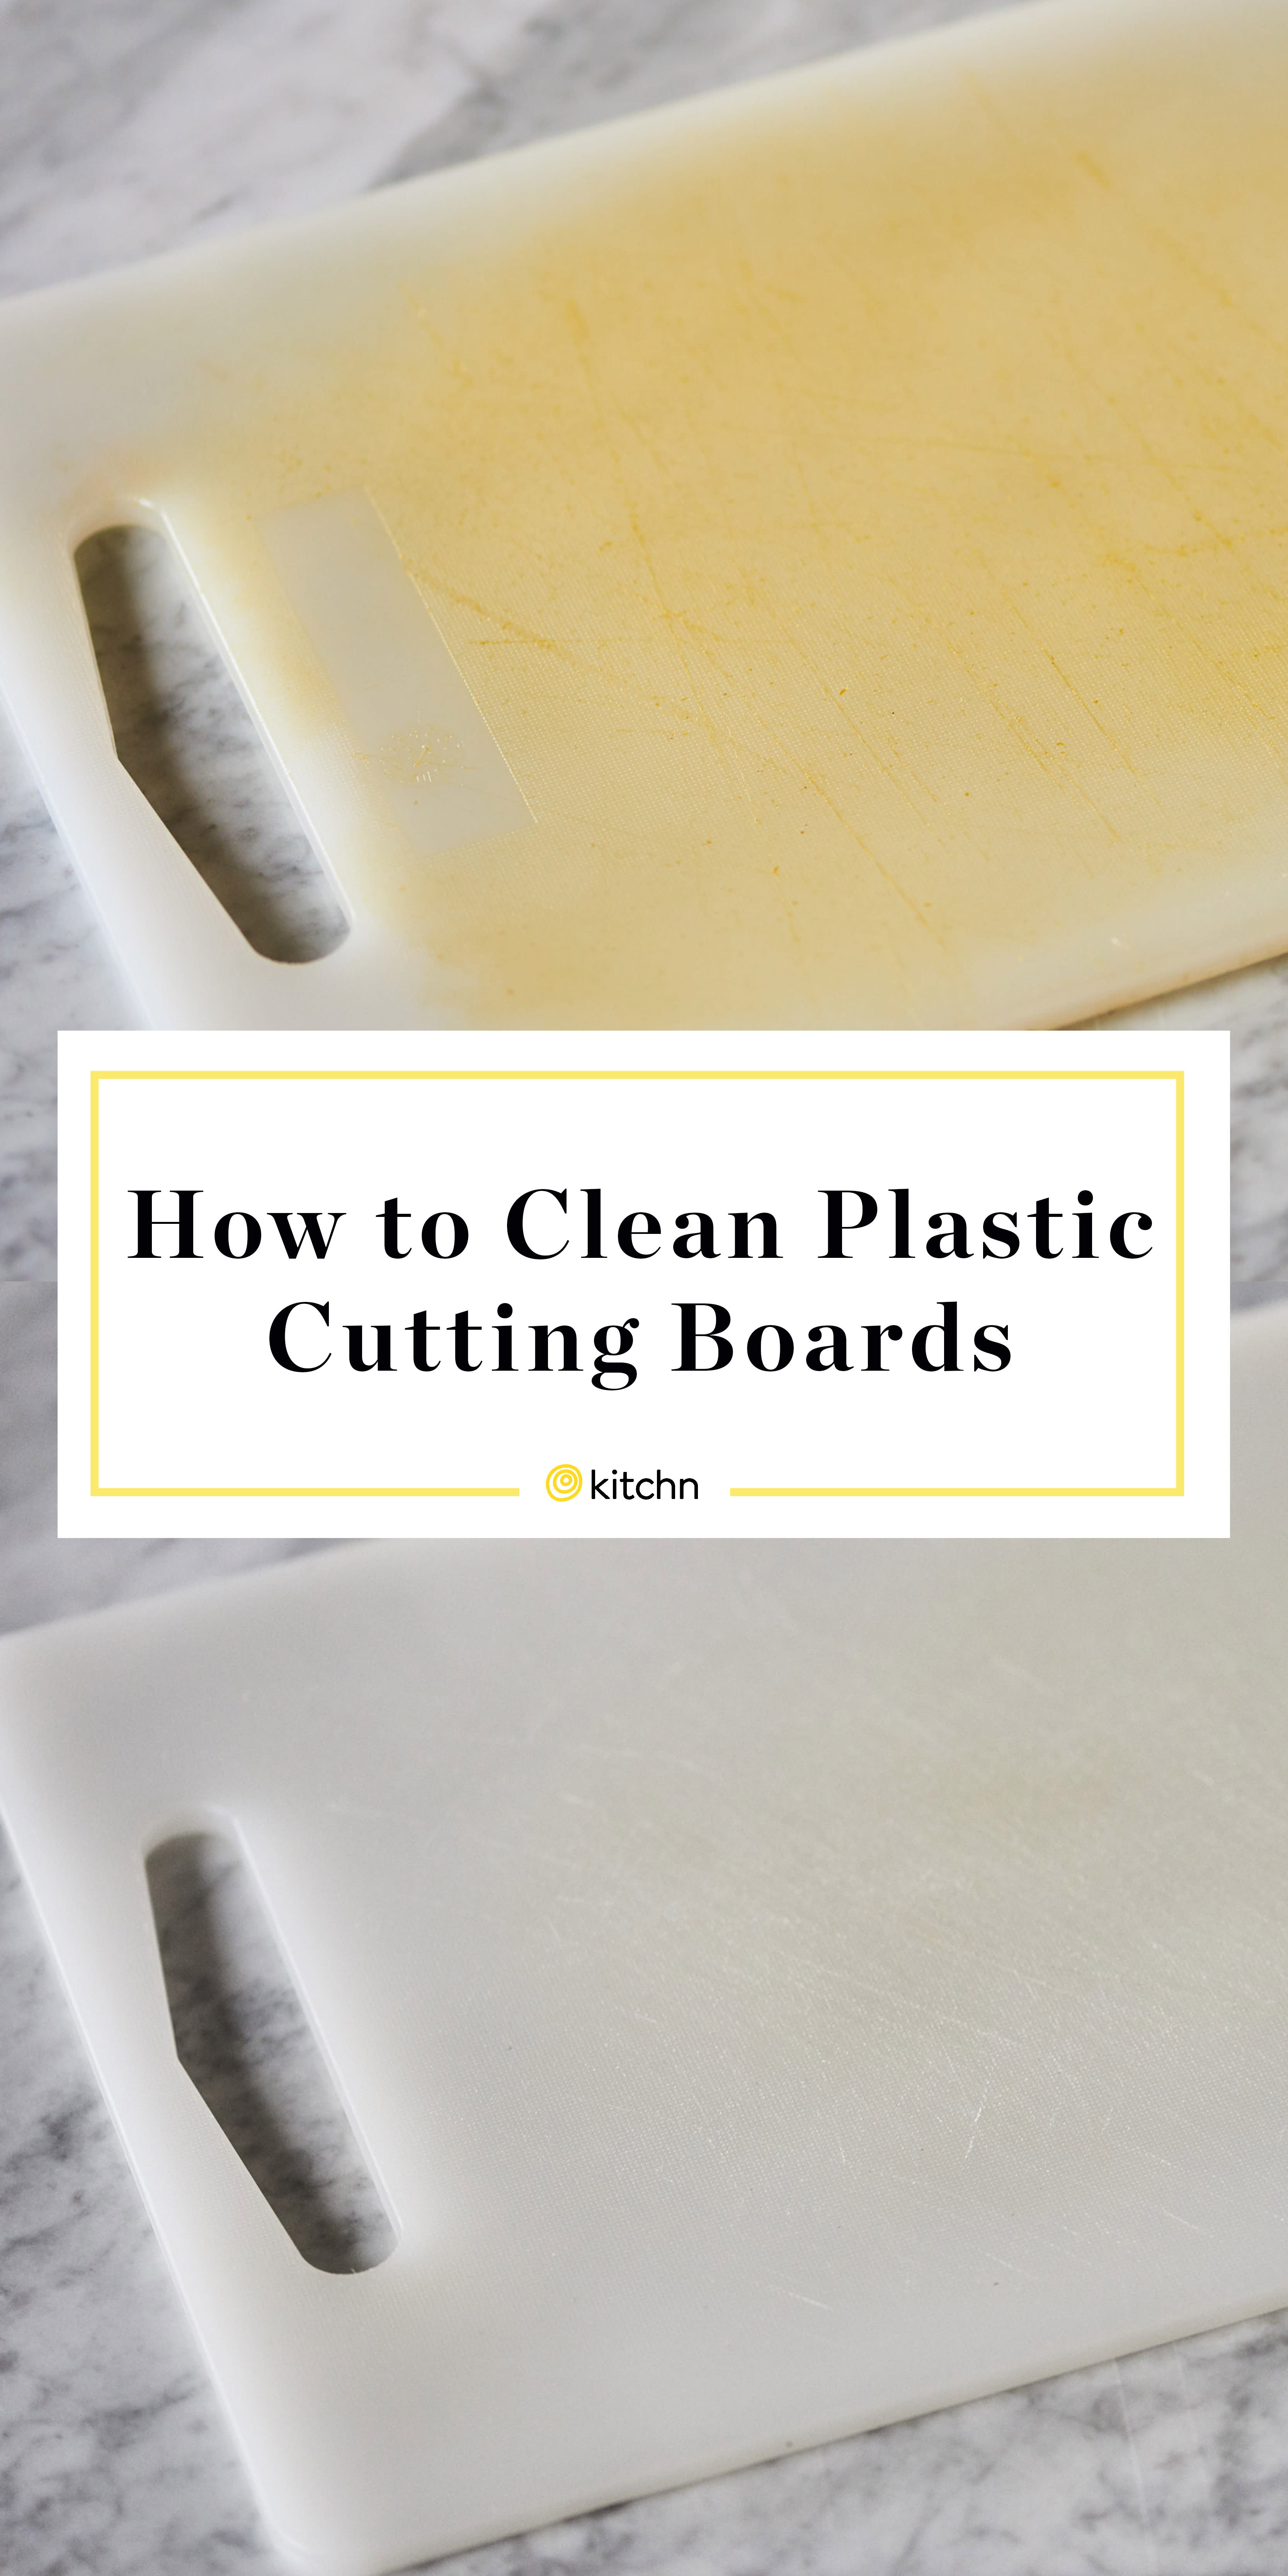 How to Clean and Disinfect Plastic Cutting Boards- A Cultivated Nest